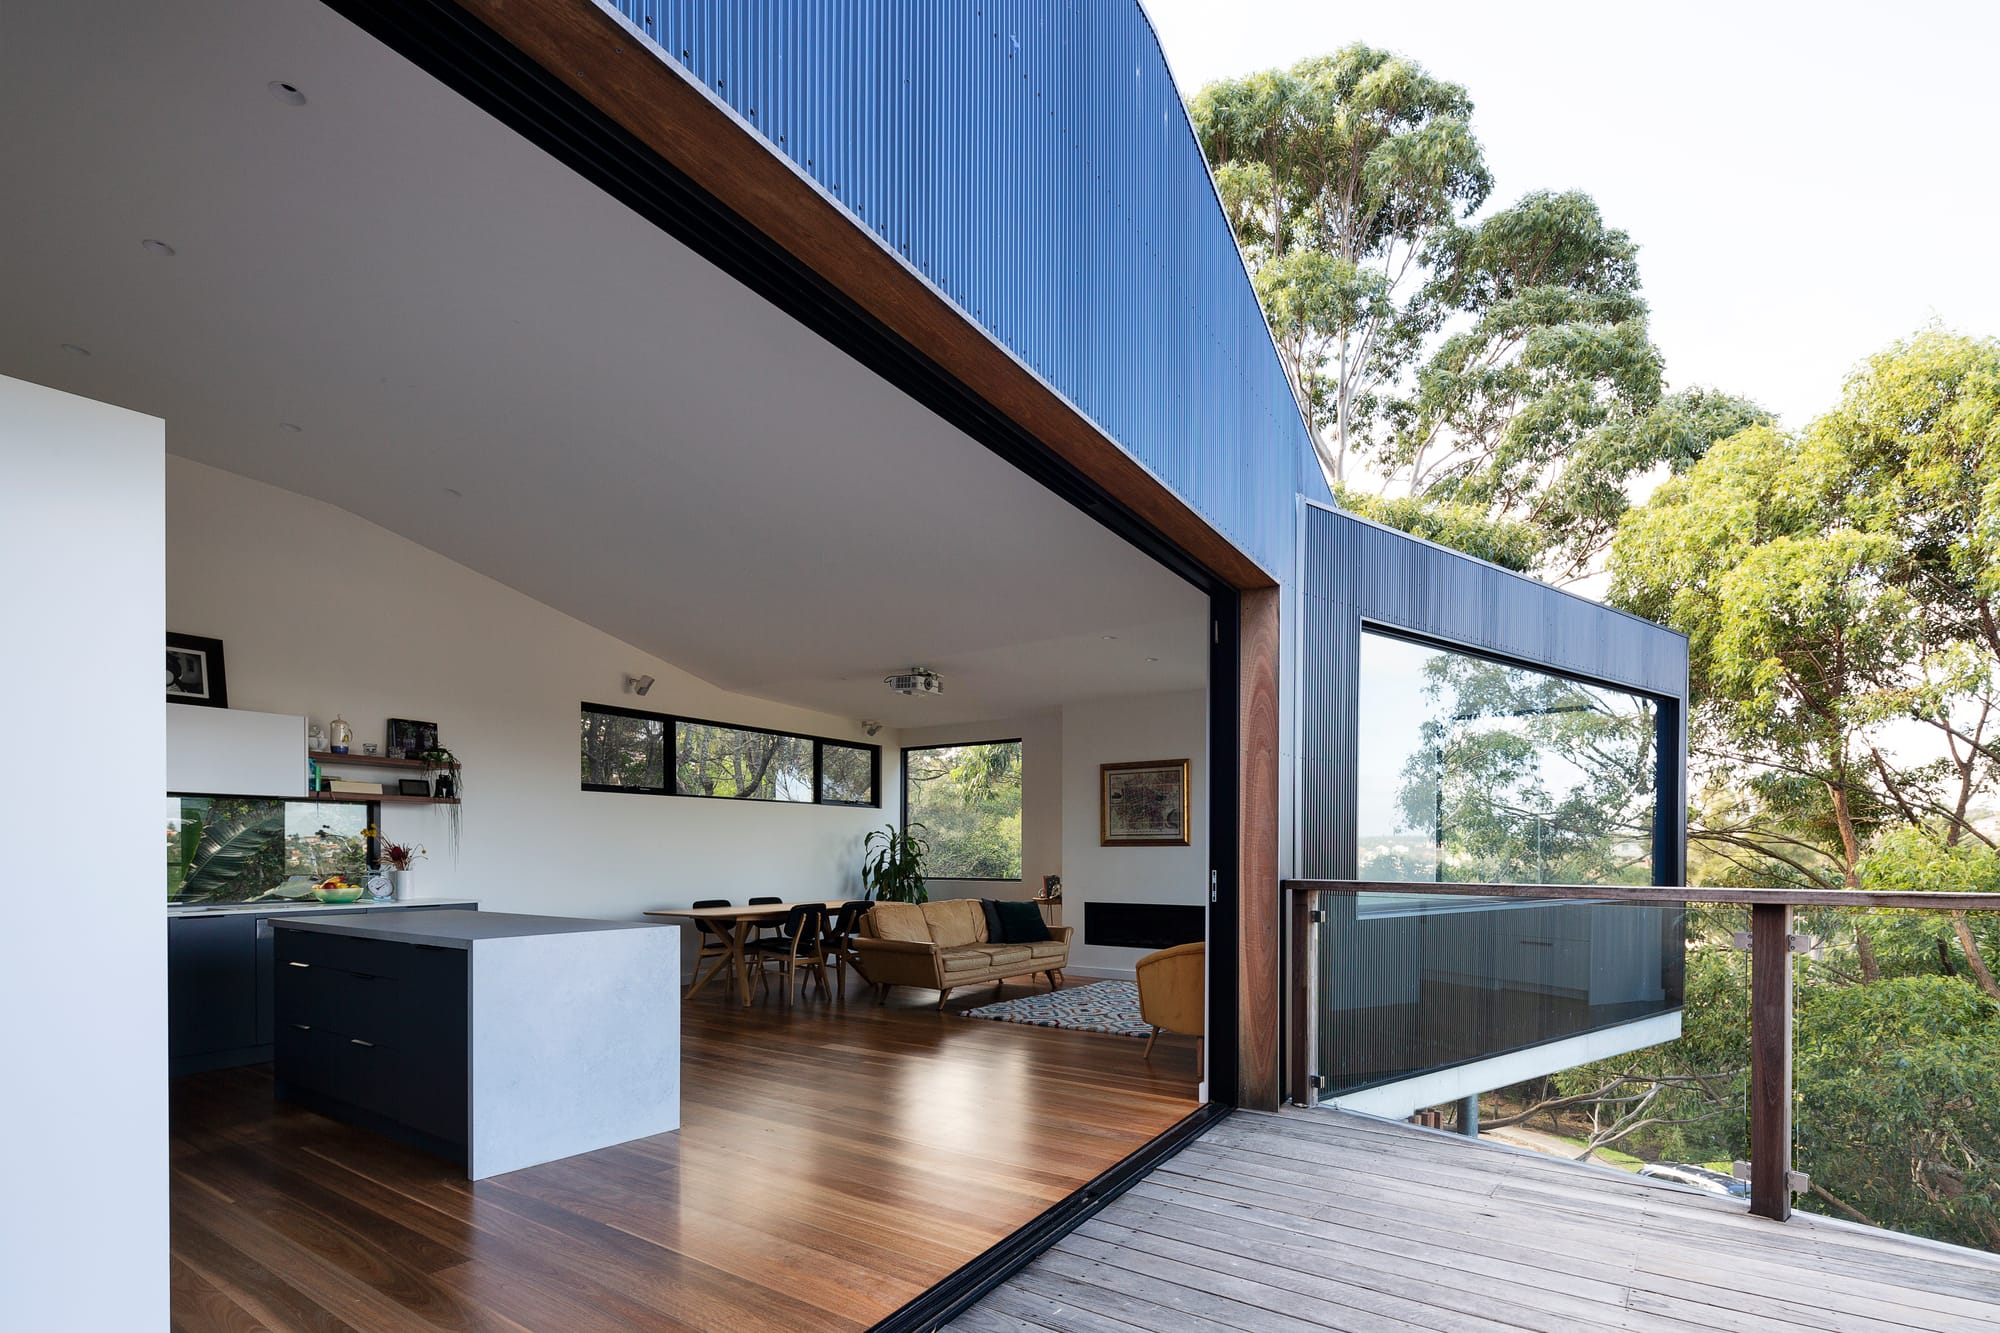 Tree House by North By North. Photography by Simon Whitbread. Open plan living space extending onto timber deck. Views of trees. Black kitchen cabinetry.